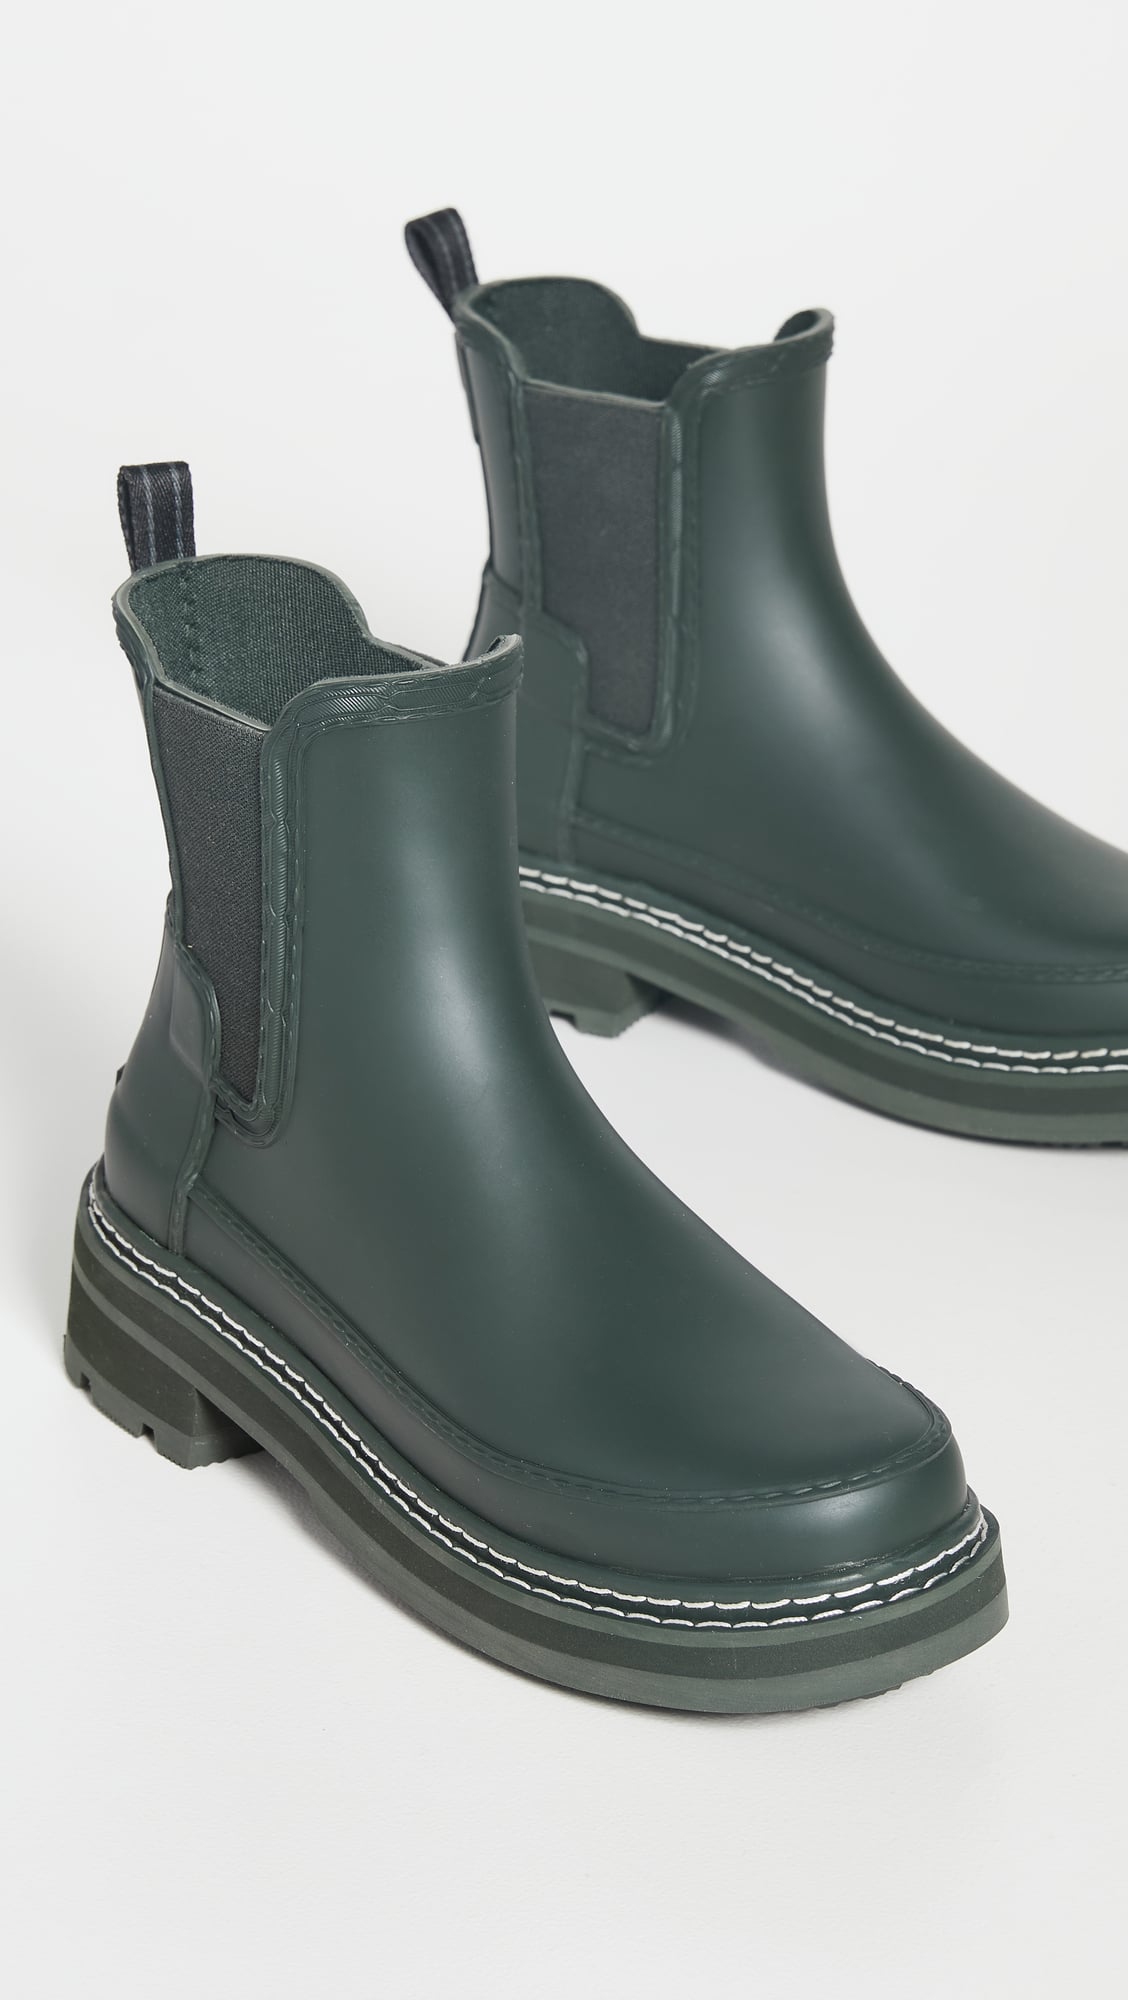 A Cute Rain Boot: Hunter Boots Refined Stitch Chelsea Boots | Cool Chelsea Boots We Can't Stop Thinking About Buying This Fall | POPSUGAR Fashion Photo 17